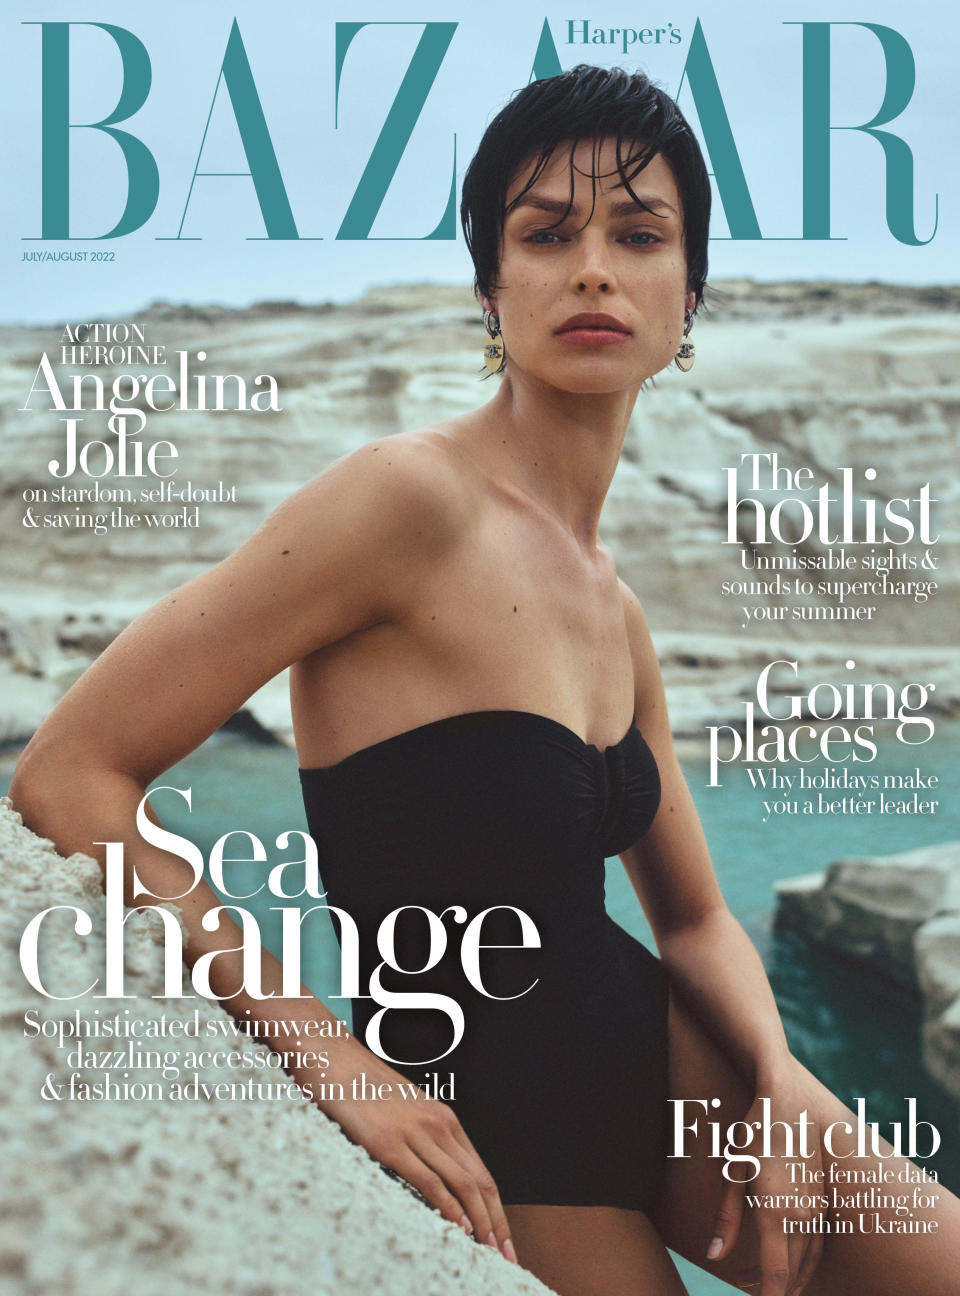 Full interviews with Asher-Smith and Stella Creasy are available in the July issue of Harper’s Bazaar UK (Harper’s Bazaar UK/Rachel Louise Brown/PA)